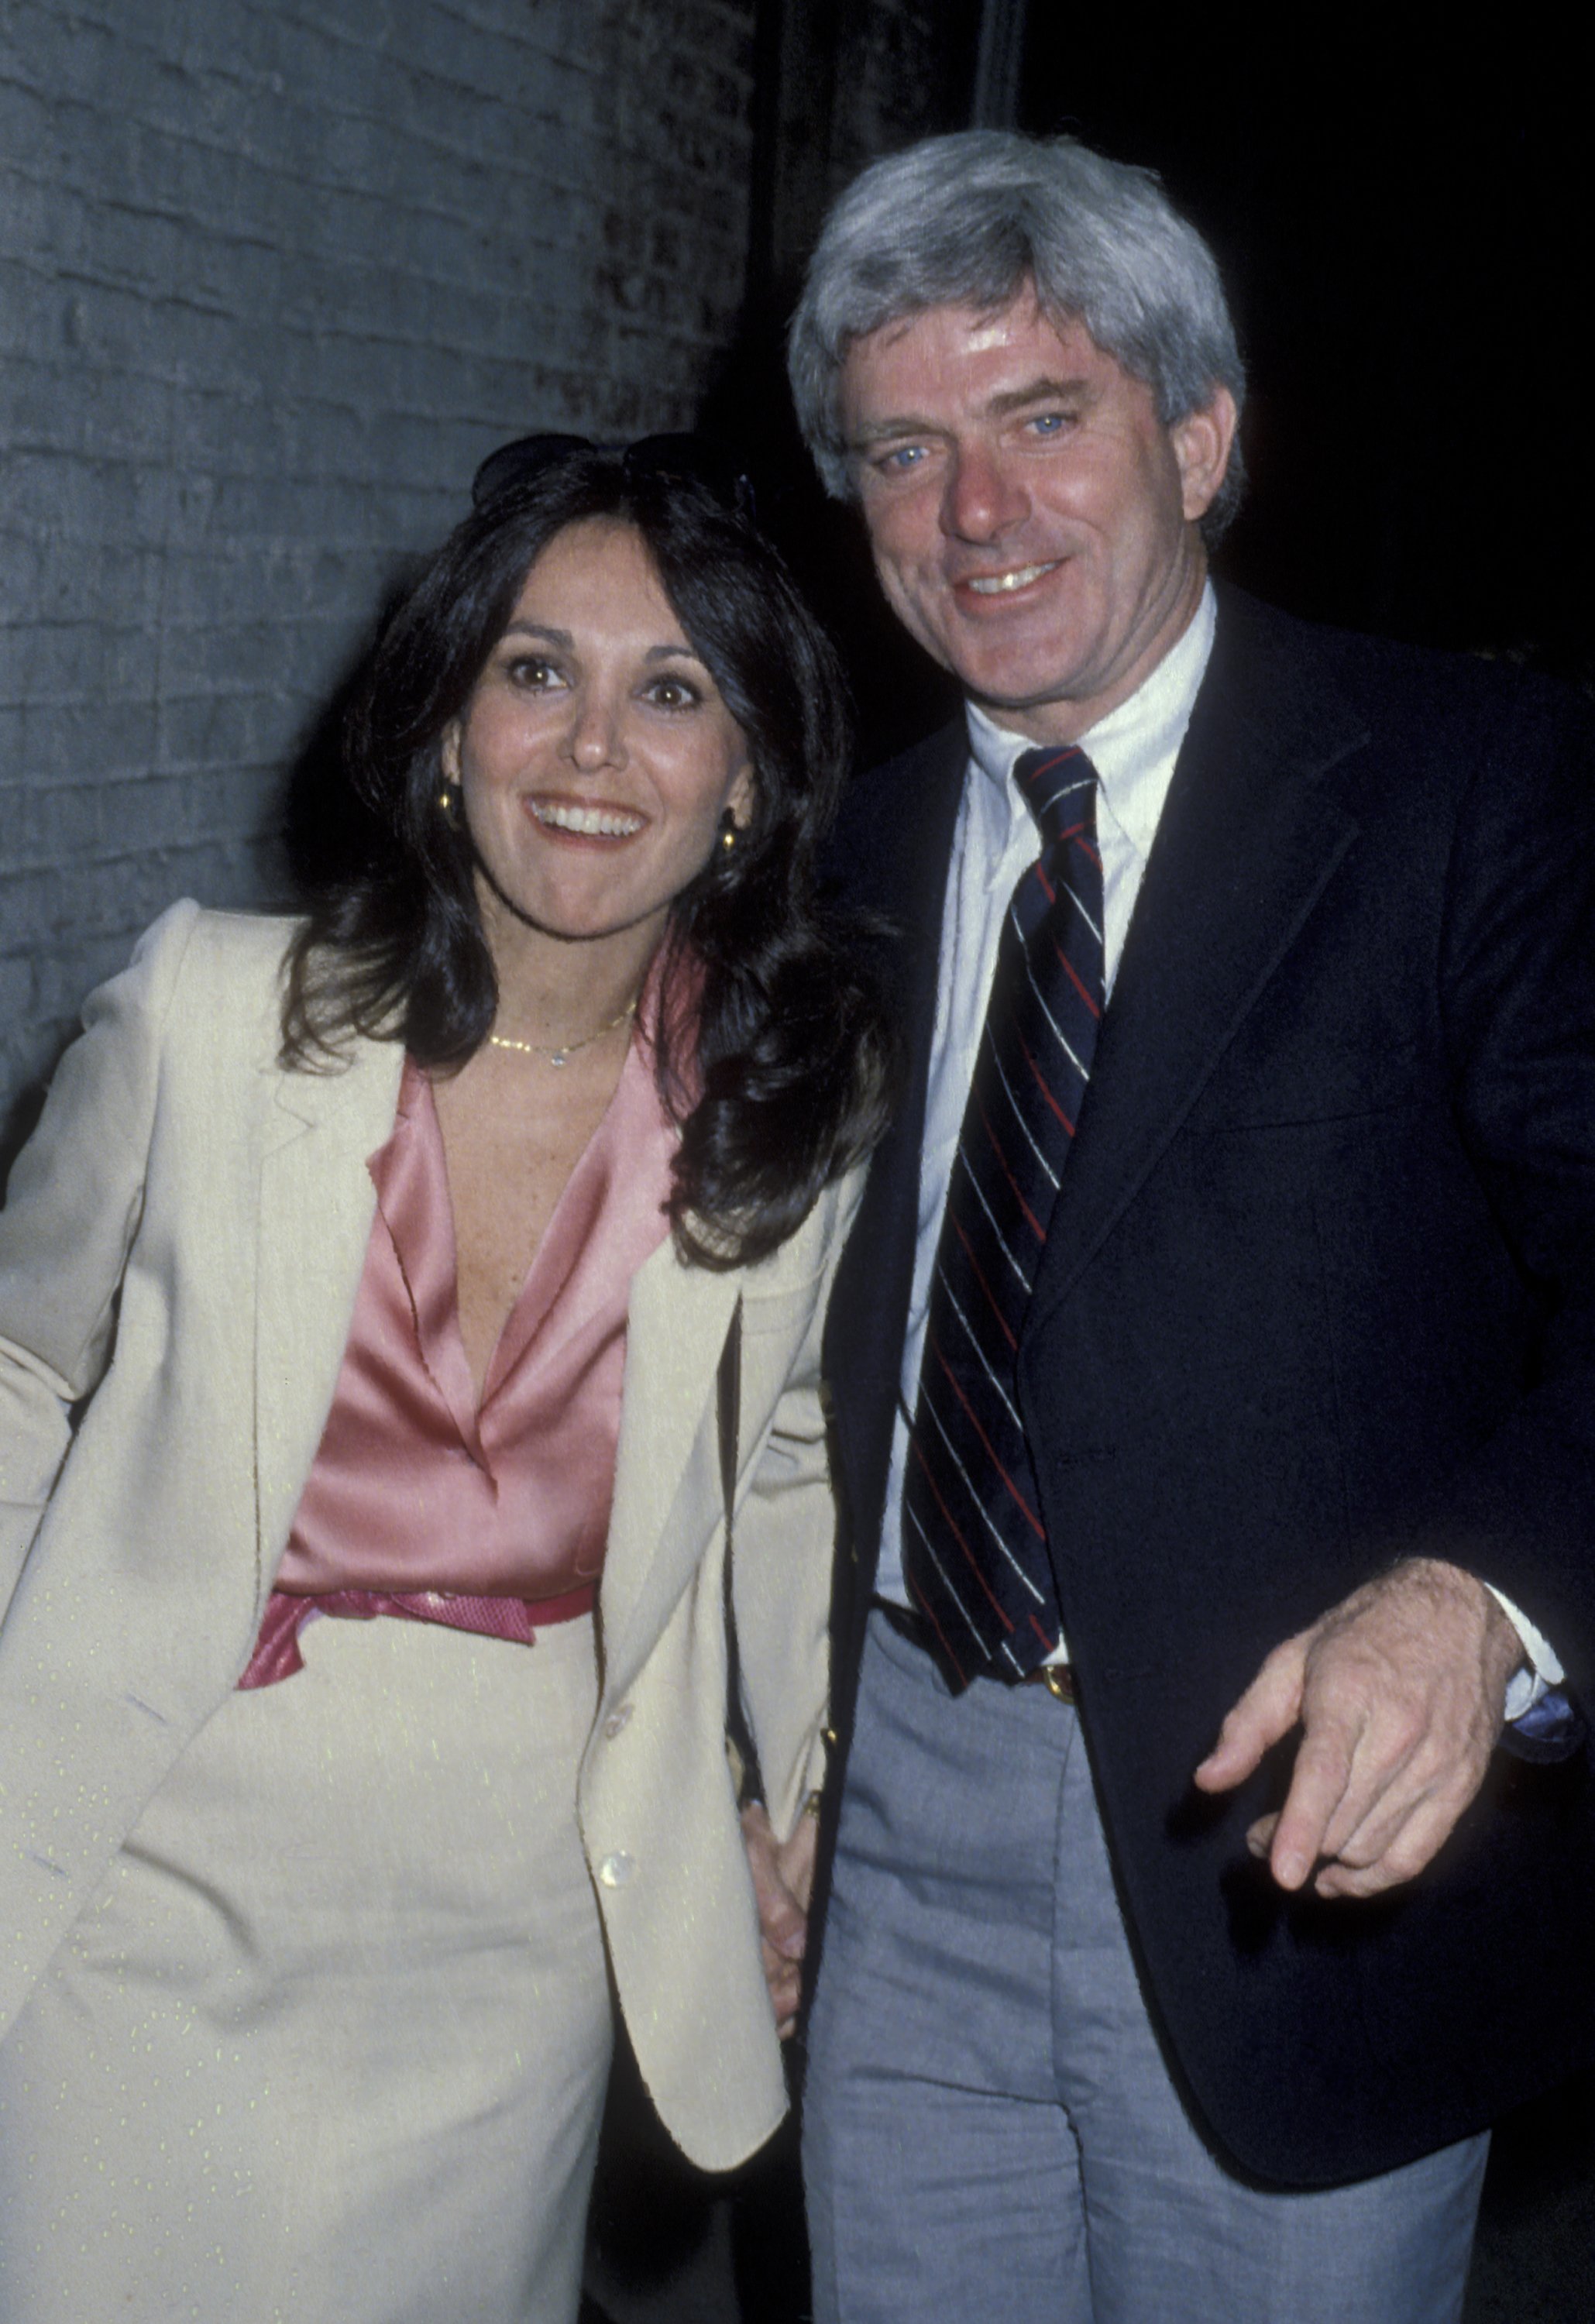 Marlo Thomas and Phil Donahue attend the opening of "The Goodbye People" on April 30, 1979 at the Belasco Theater in New York City. | Source: Getty Images